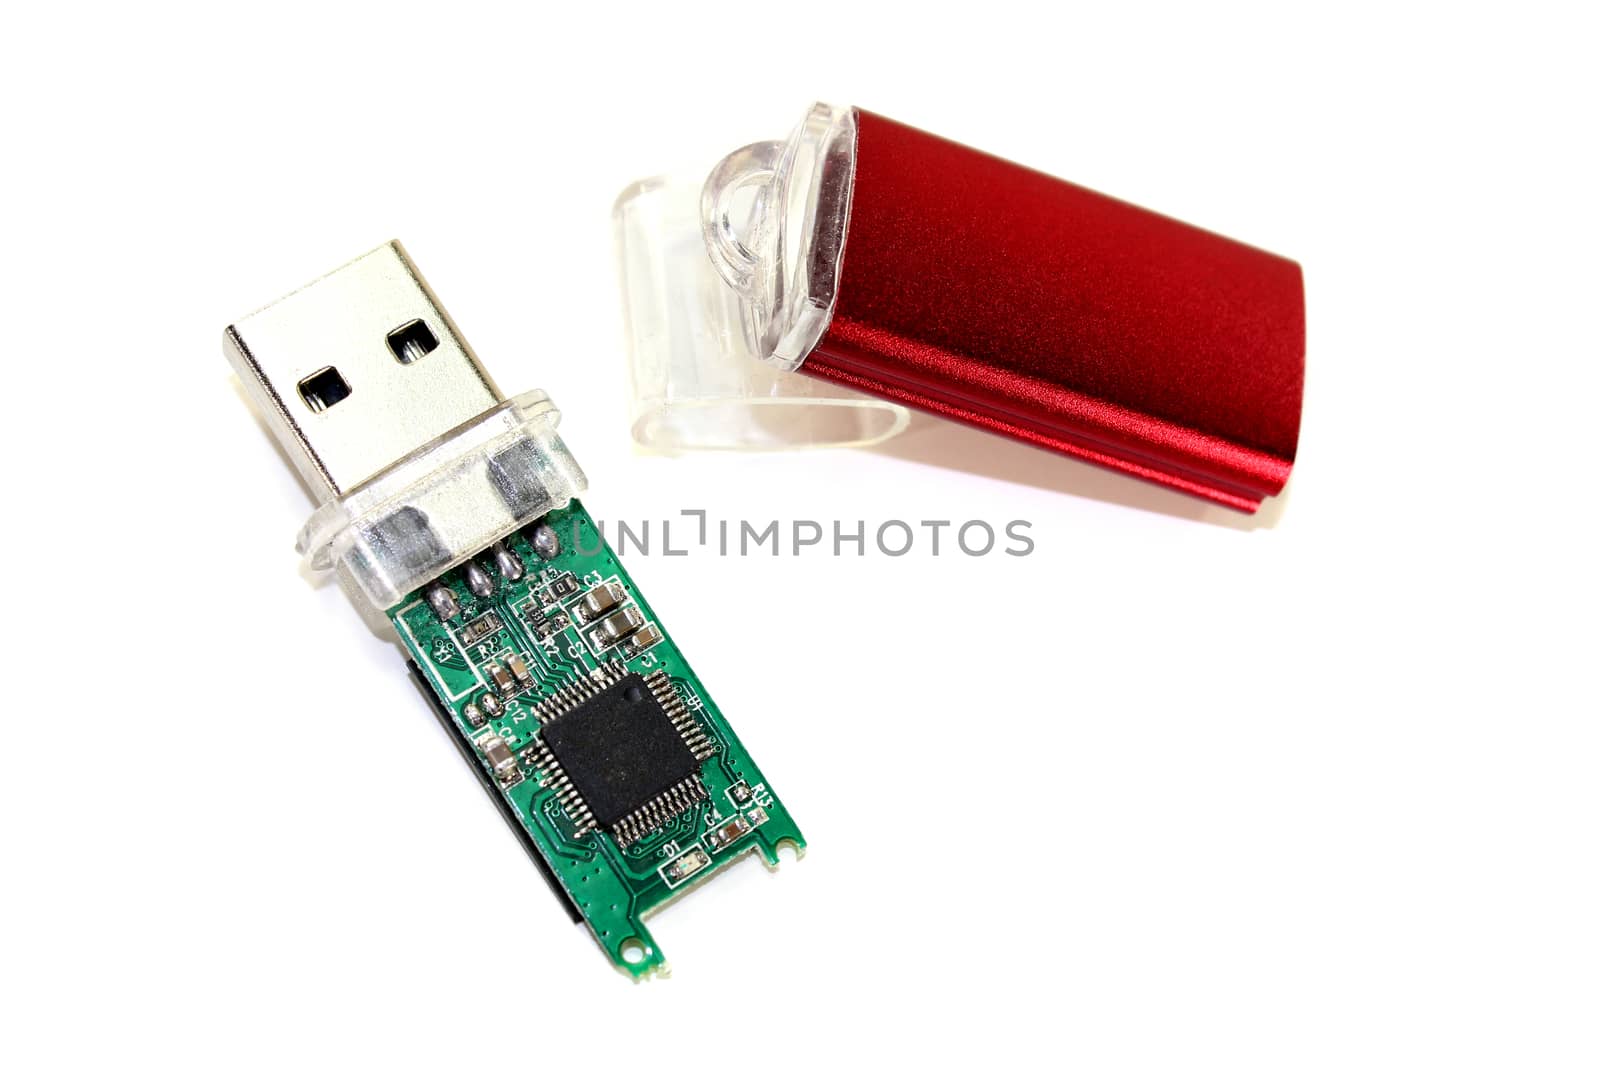 disassembled little USB flash drive on a light background